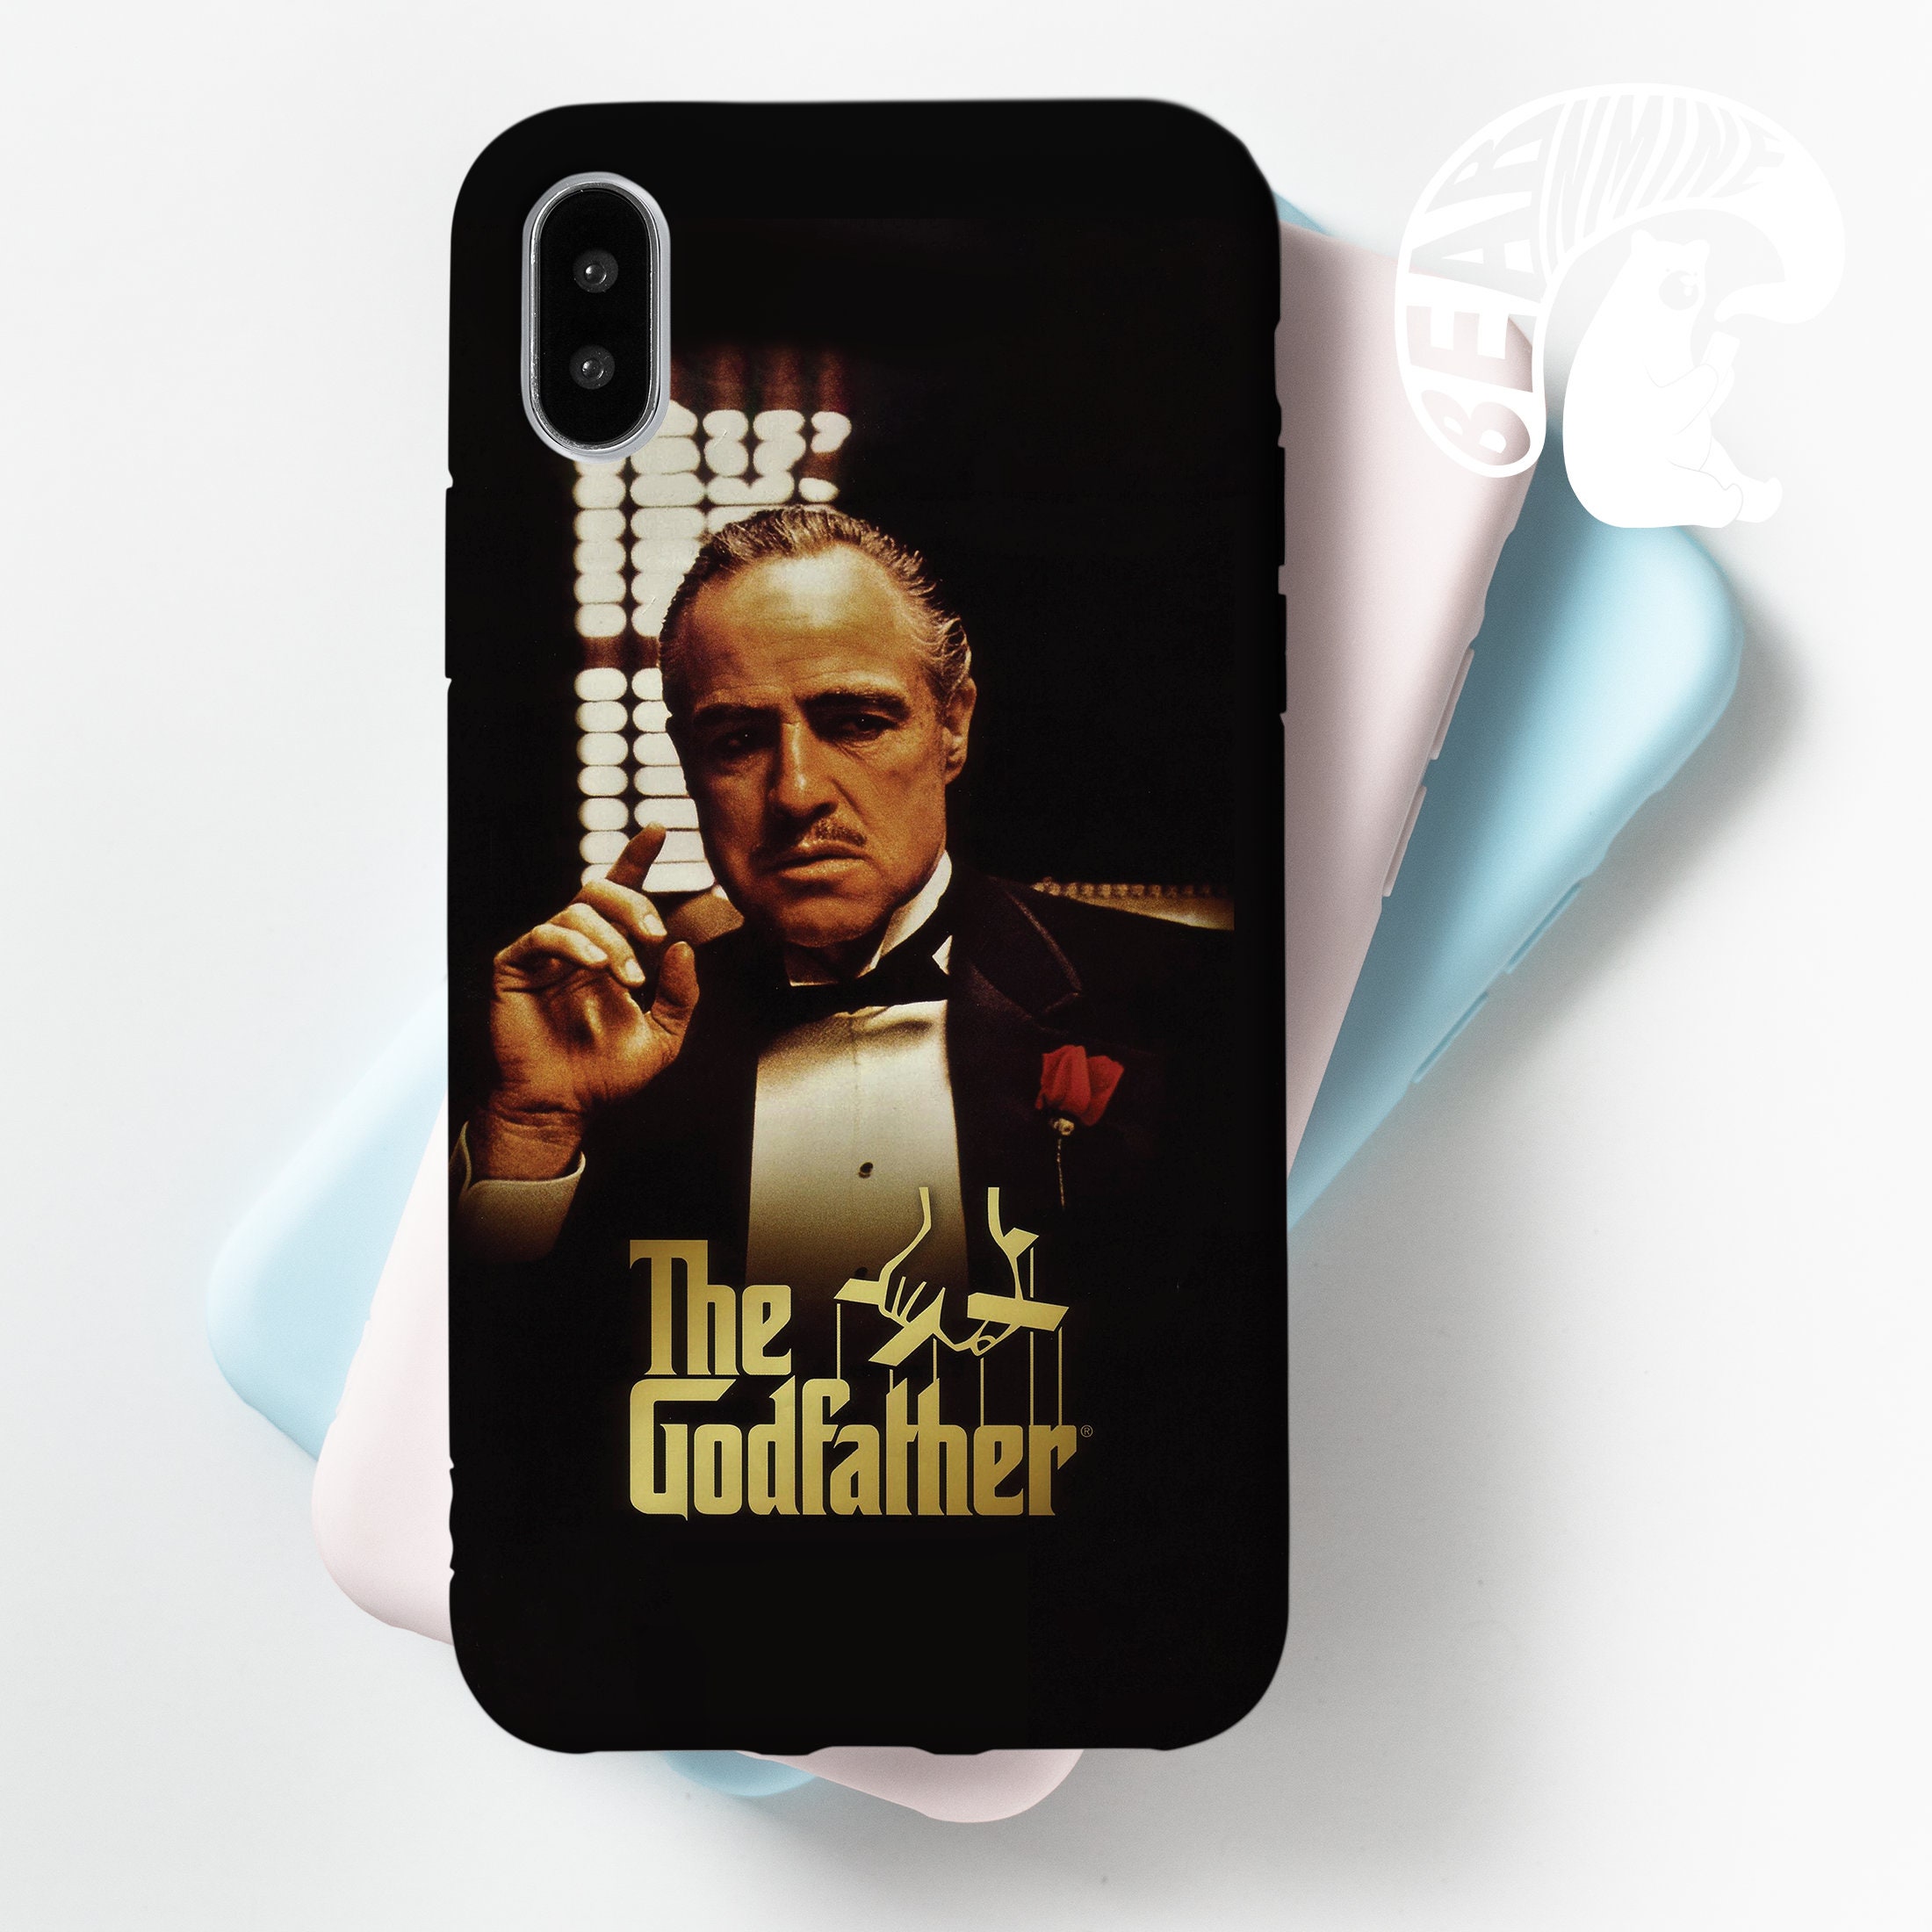 Get on the phones and make some money!! - Godfather Baby